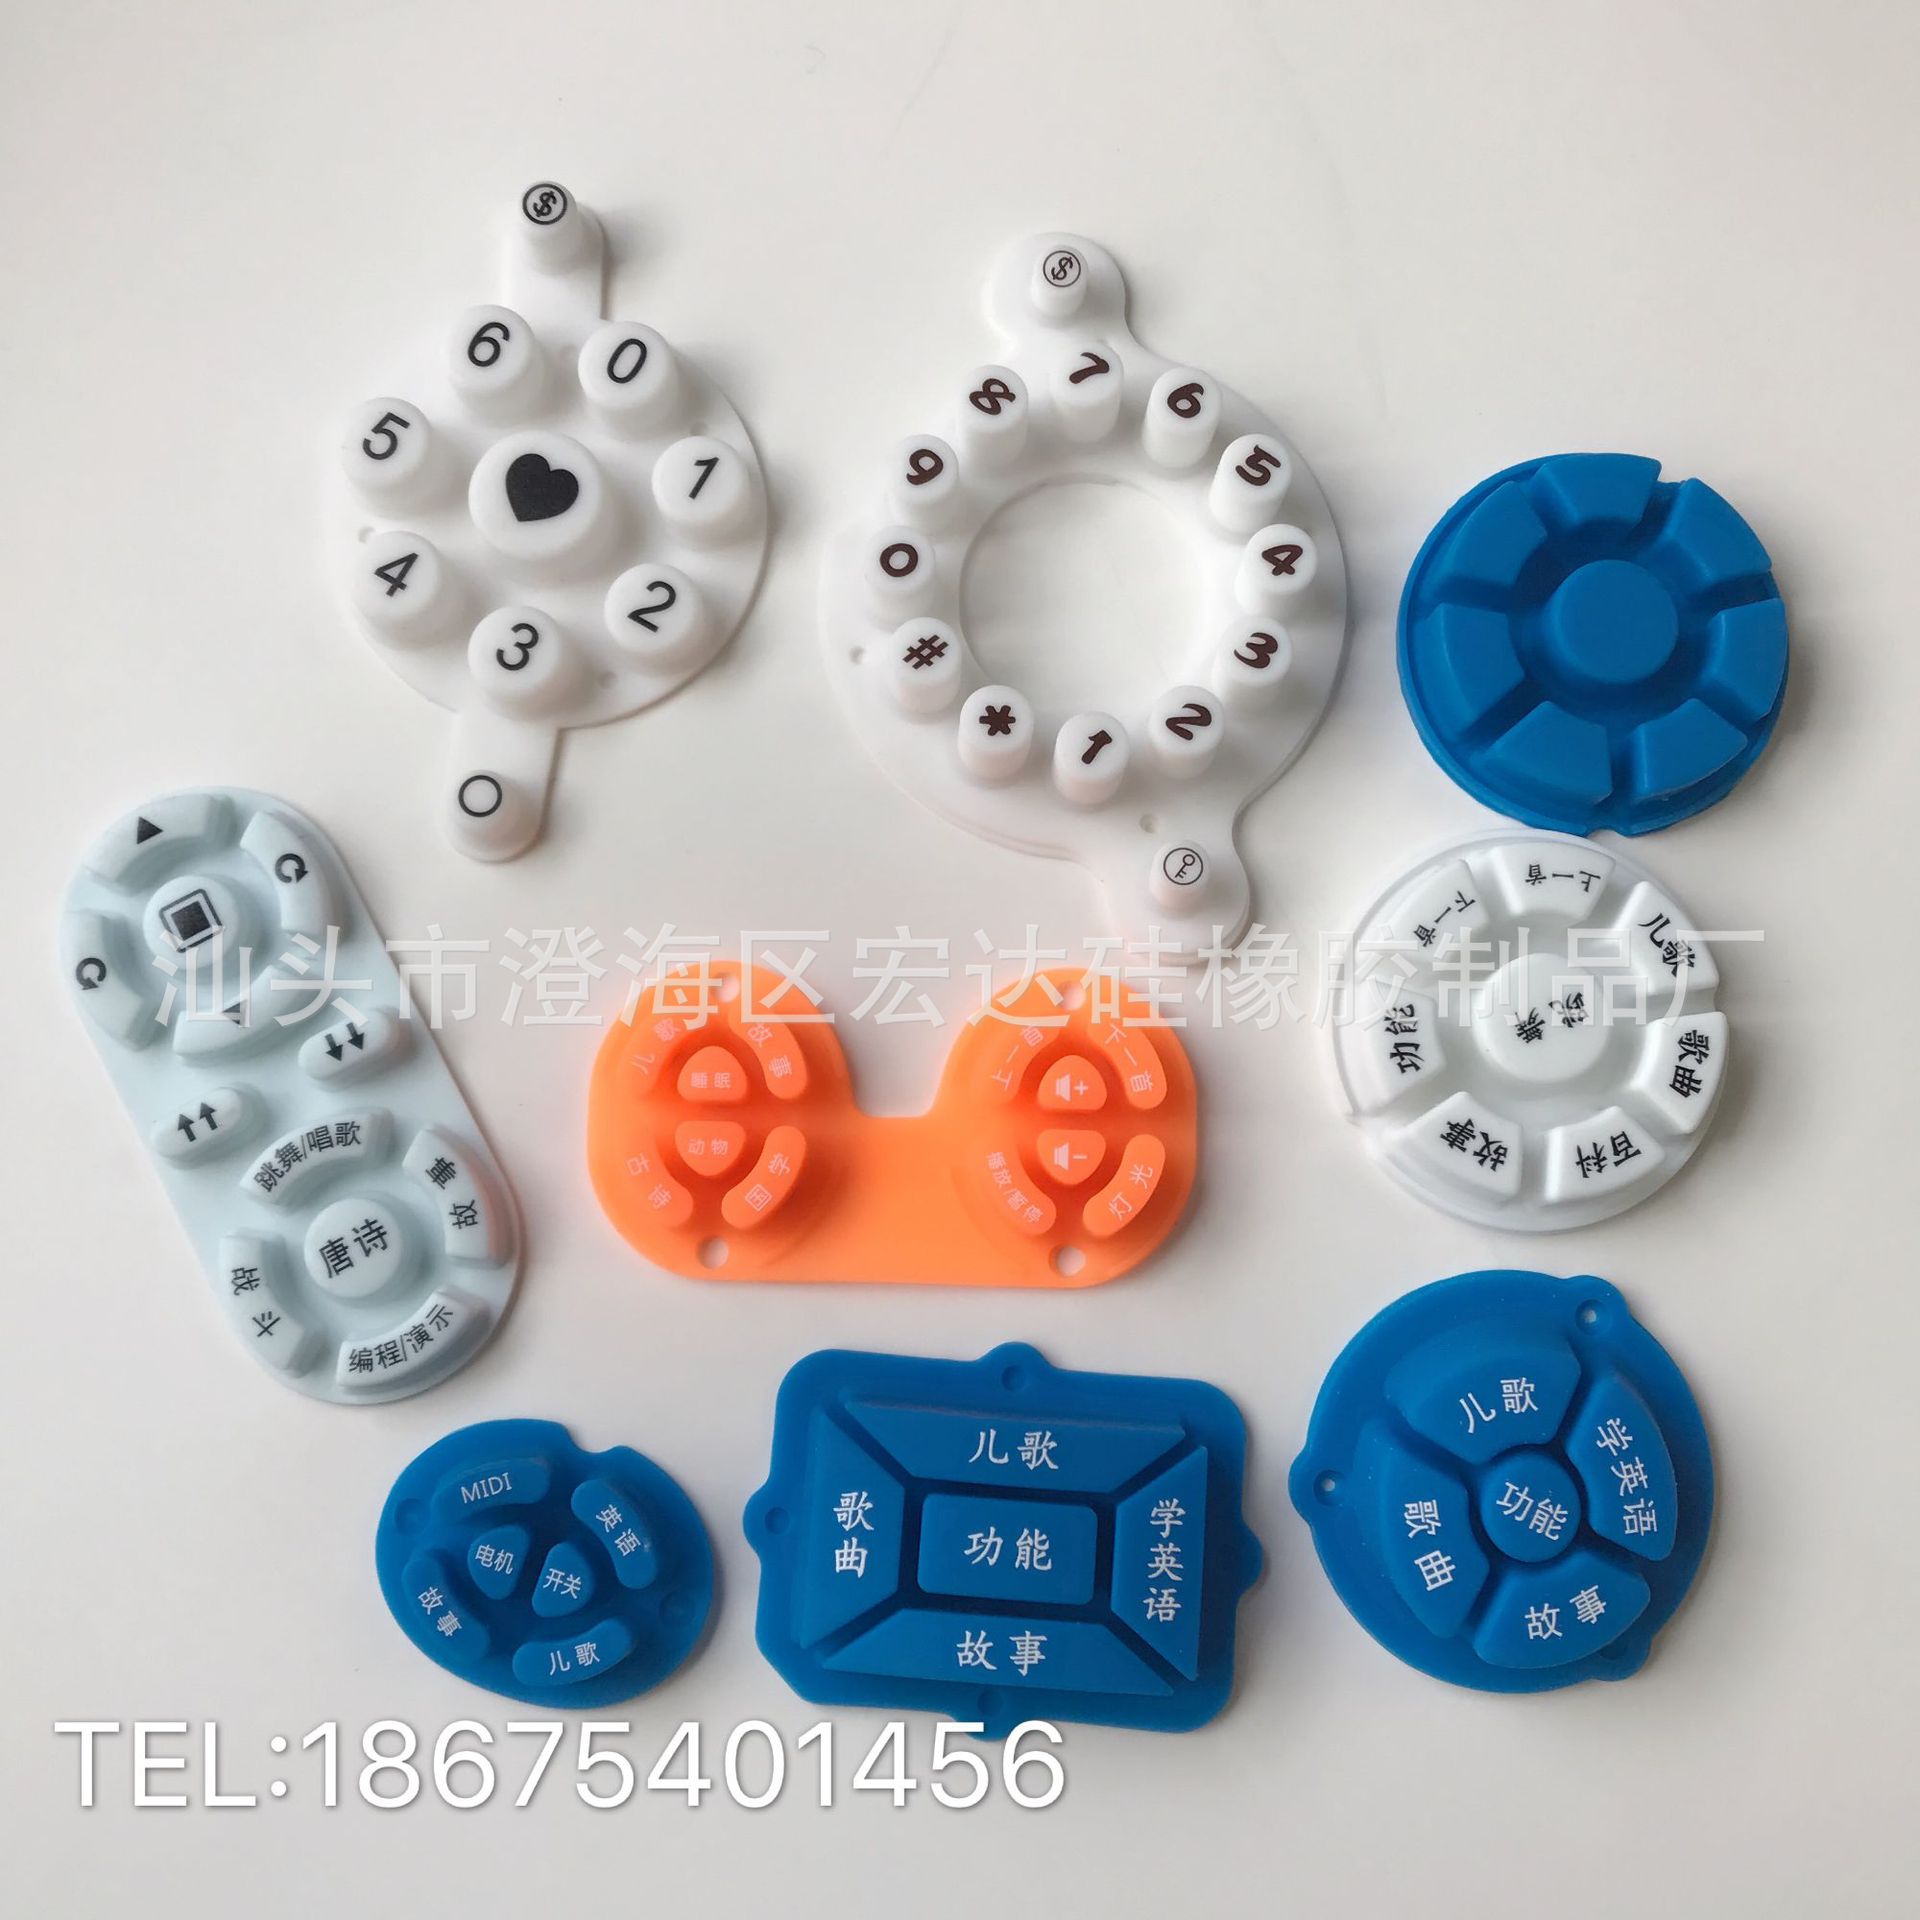 Production Silica Gel Pad Remote Control Silicone Button Alarm Silicone Waterproof Pad Electronic Switch Button